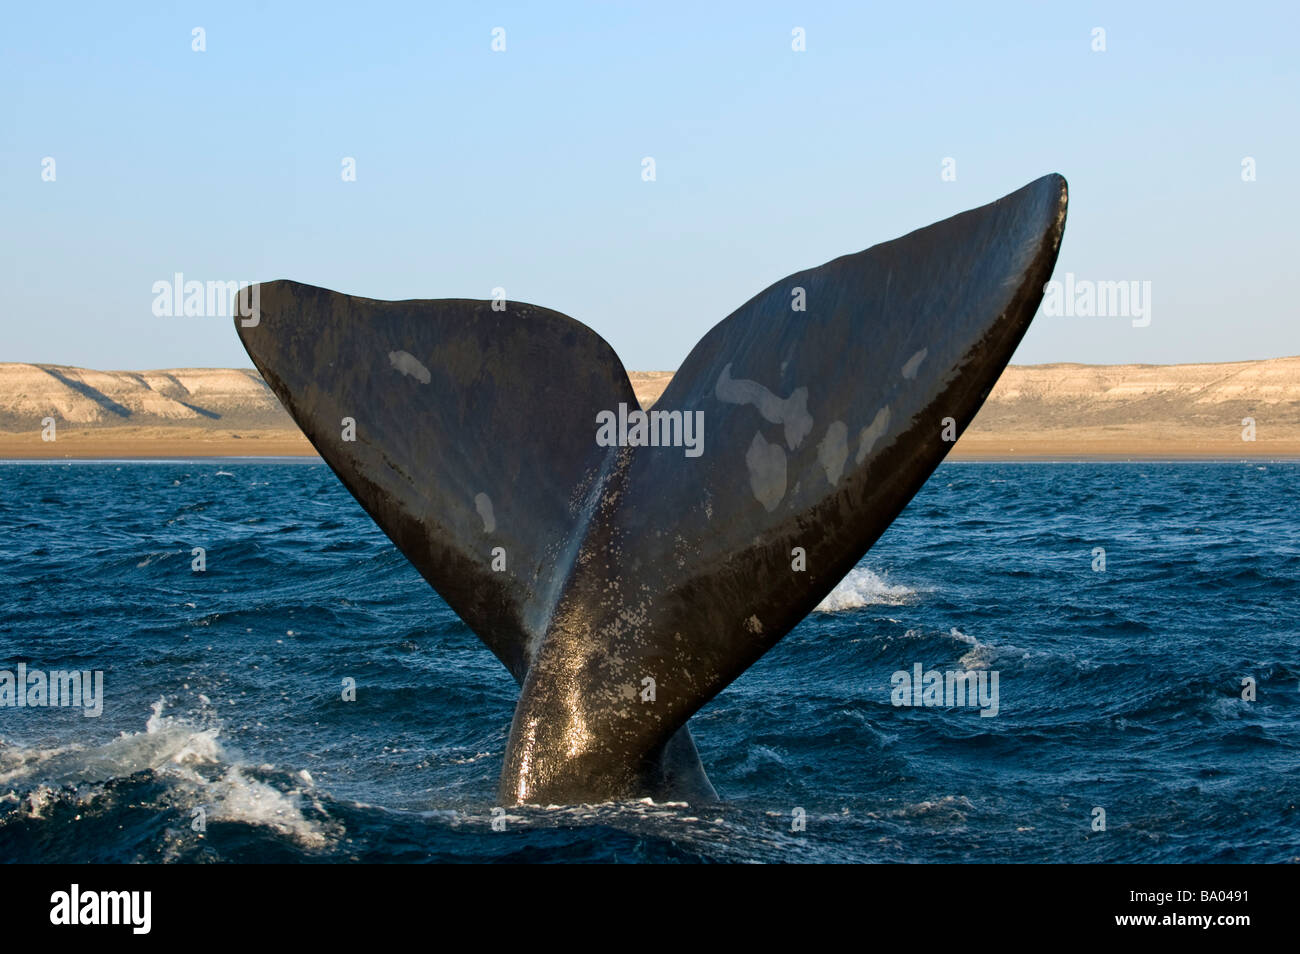 Right whale in Patagonia, Argentina. Stock Photo